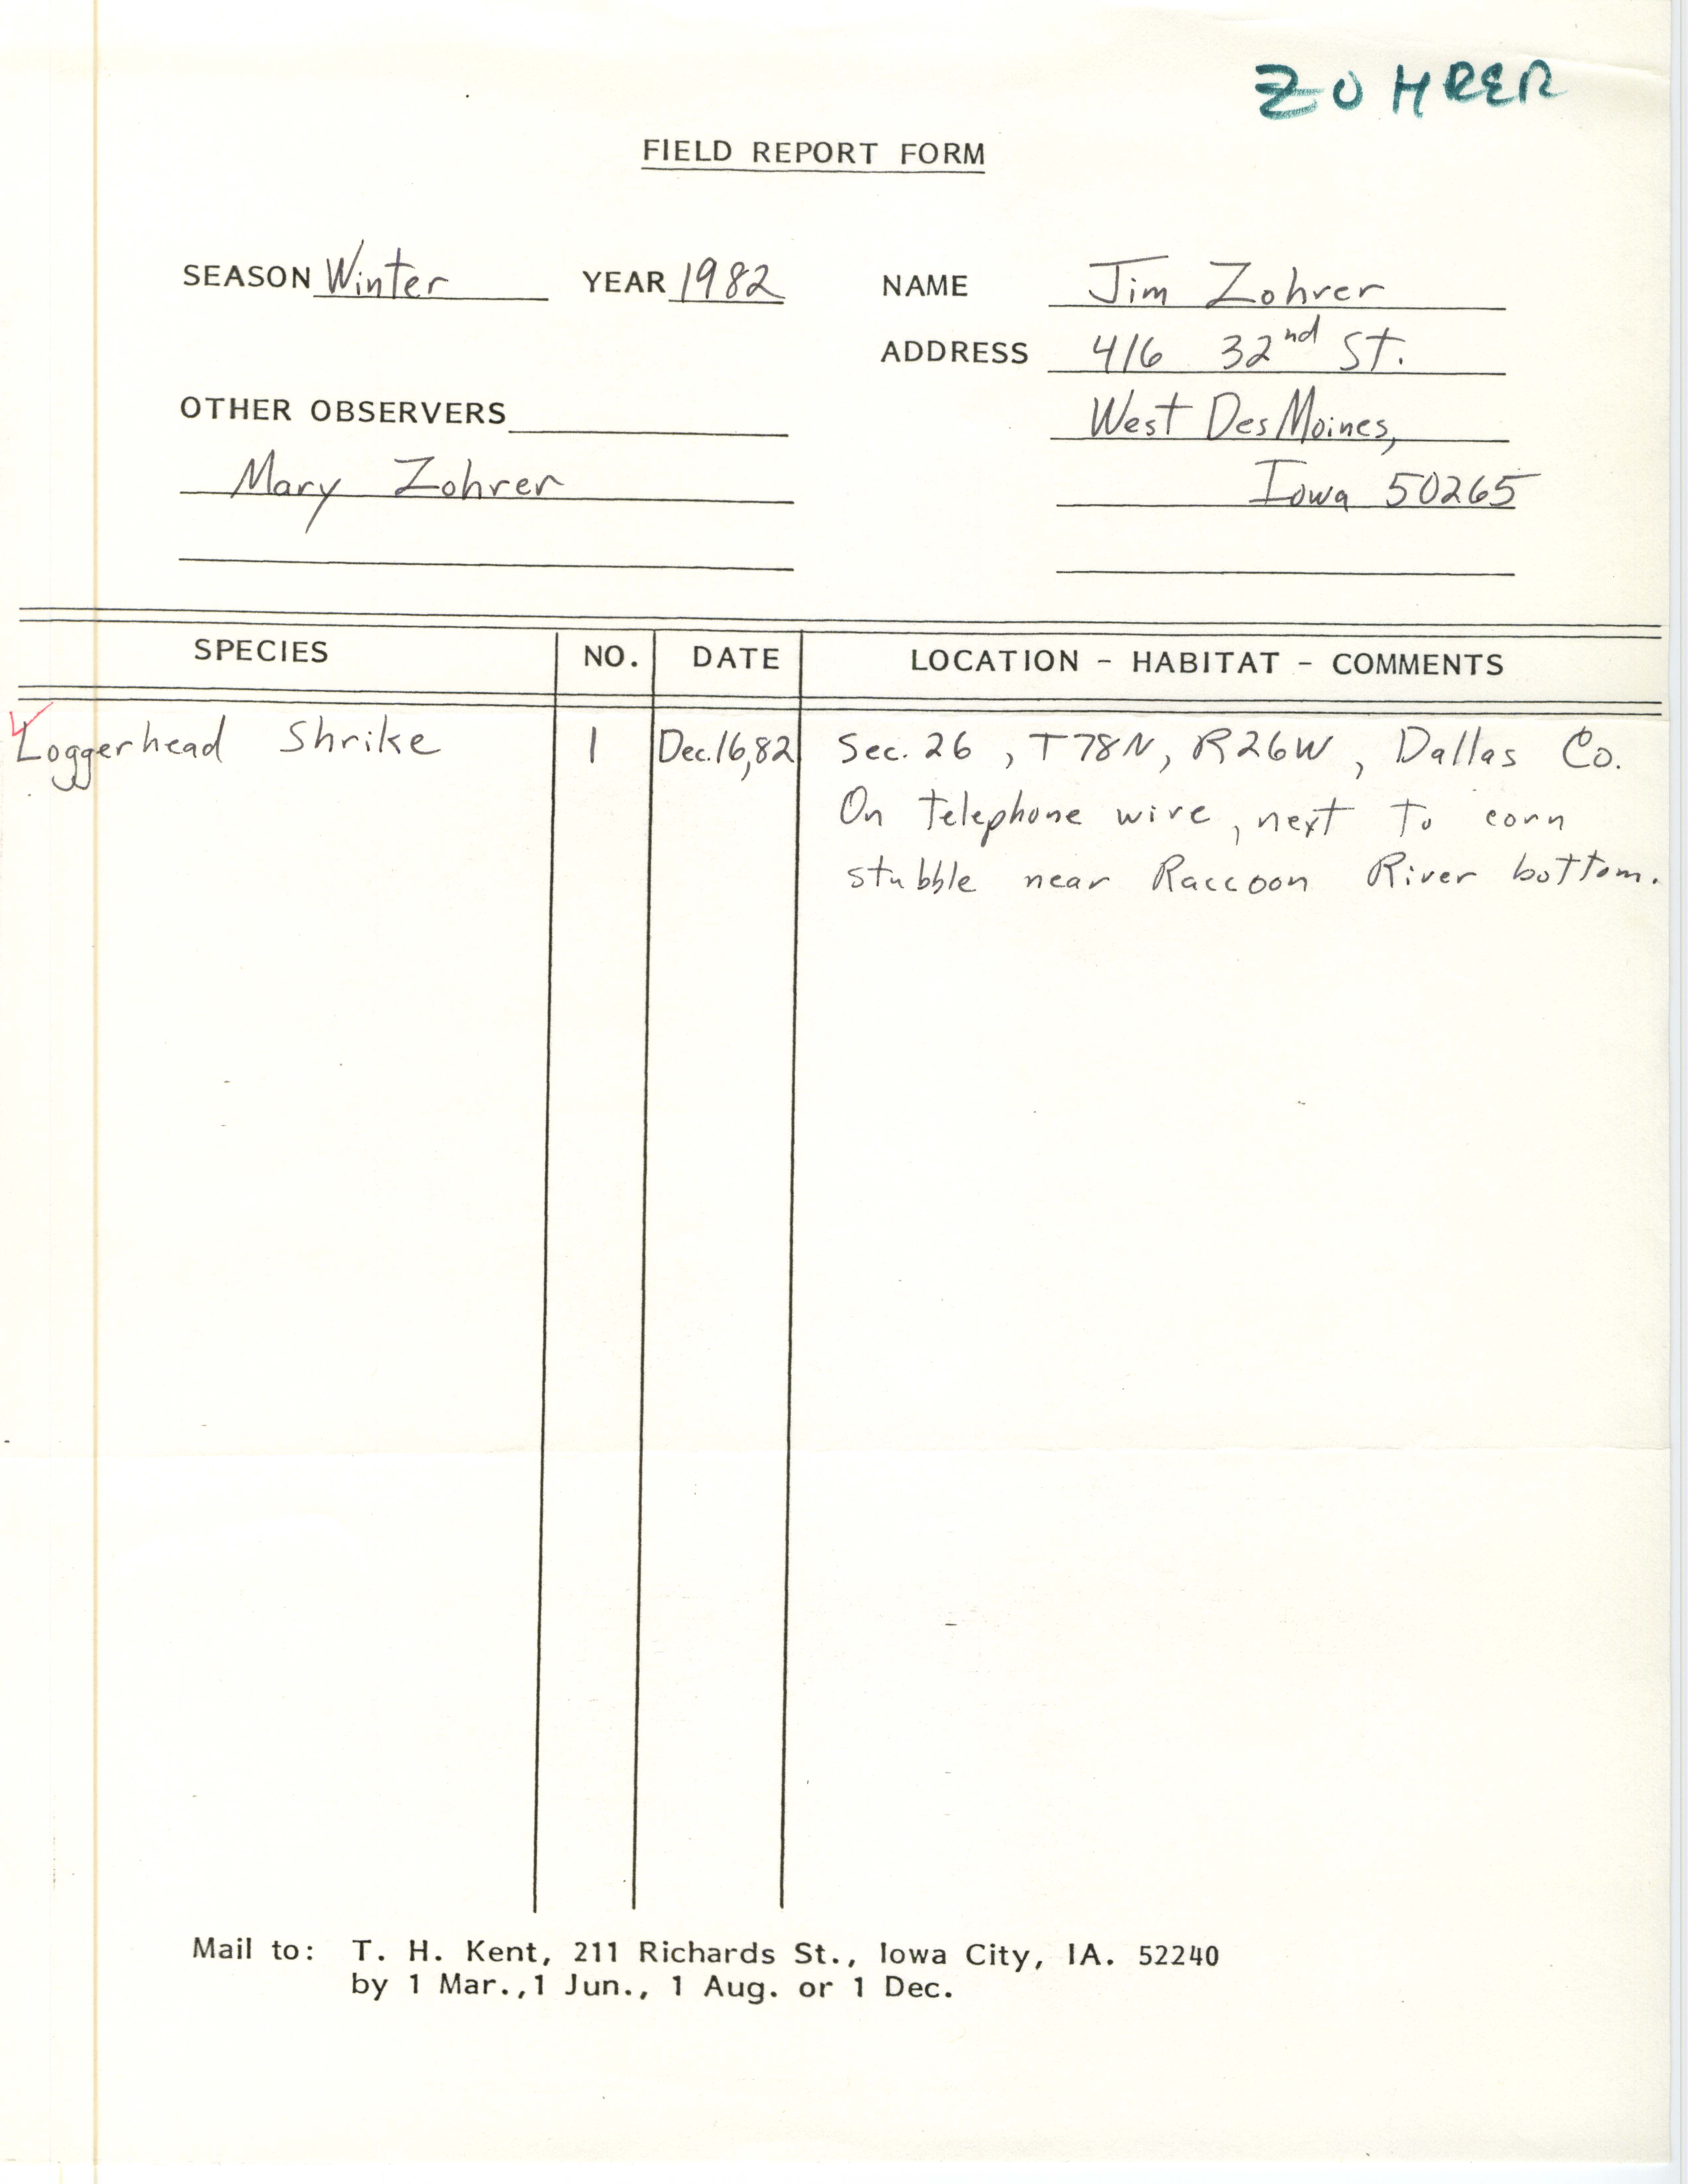 Field note about a Loggerhead Shrike sighting contributed by James J. Zohrer, winter 1982-1983